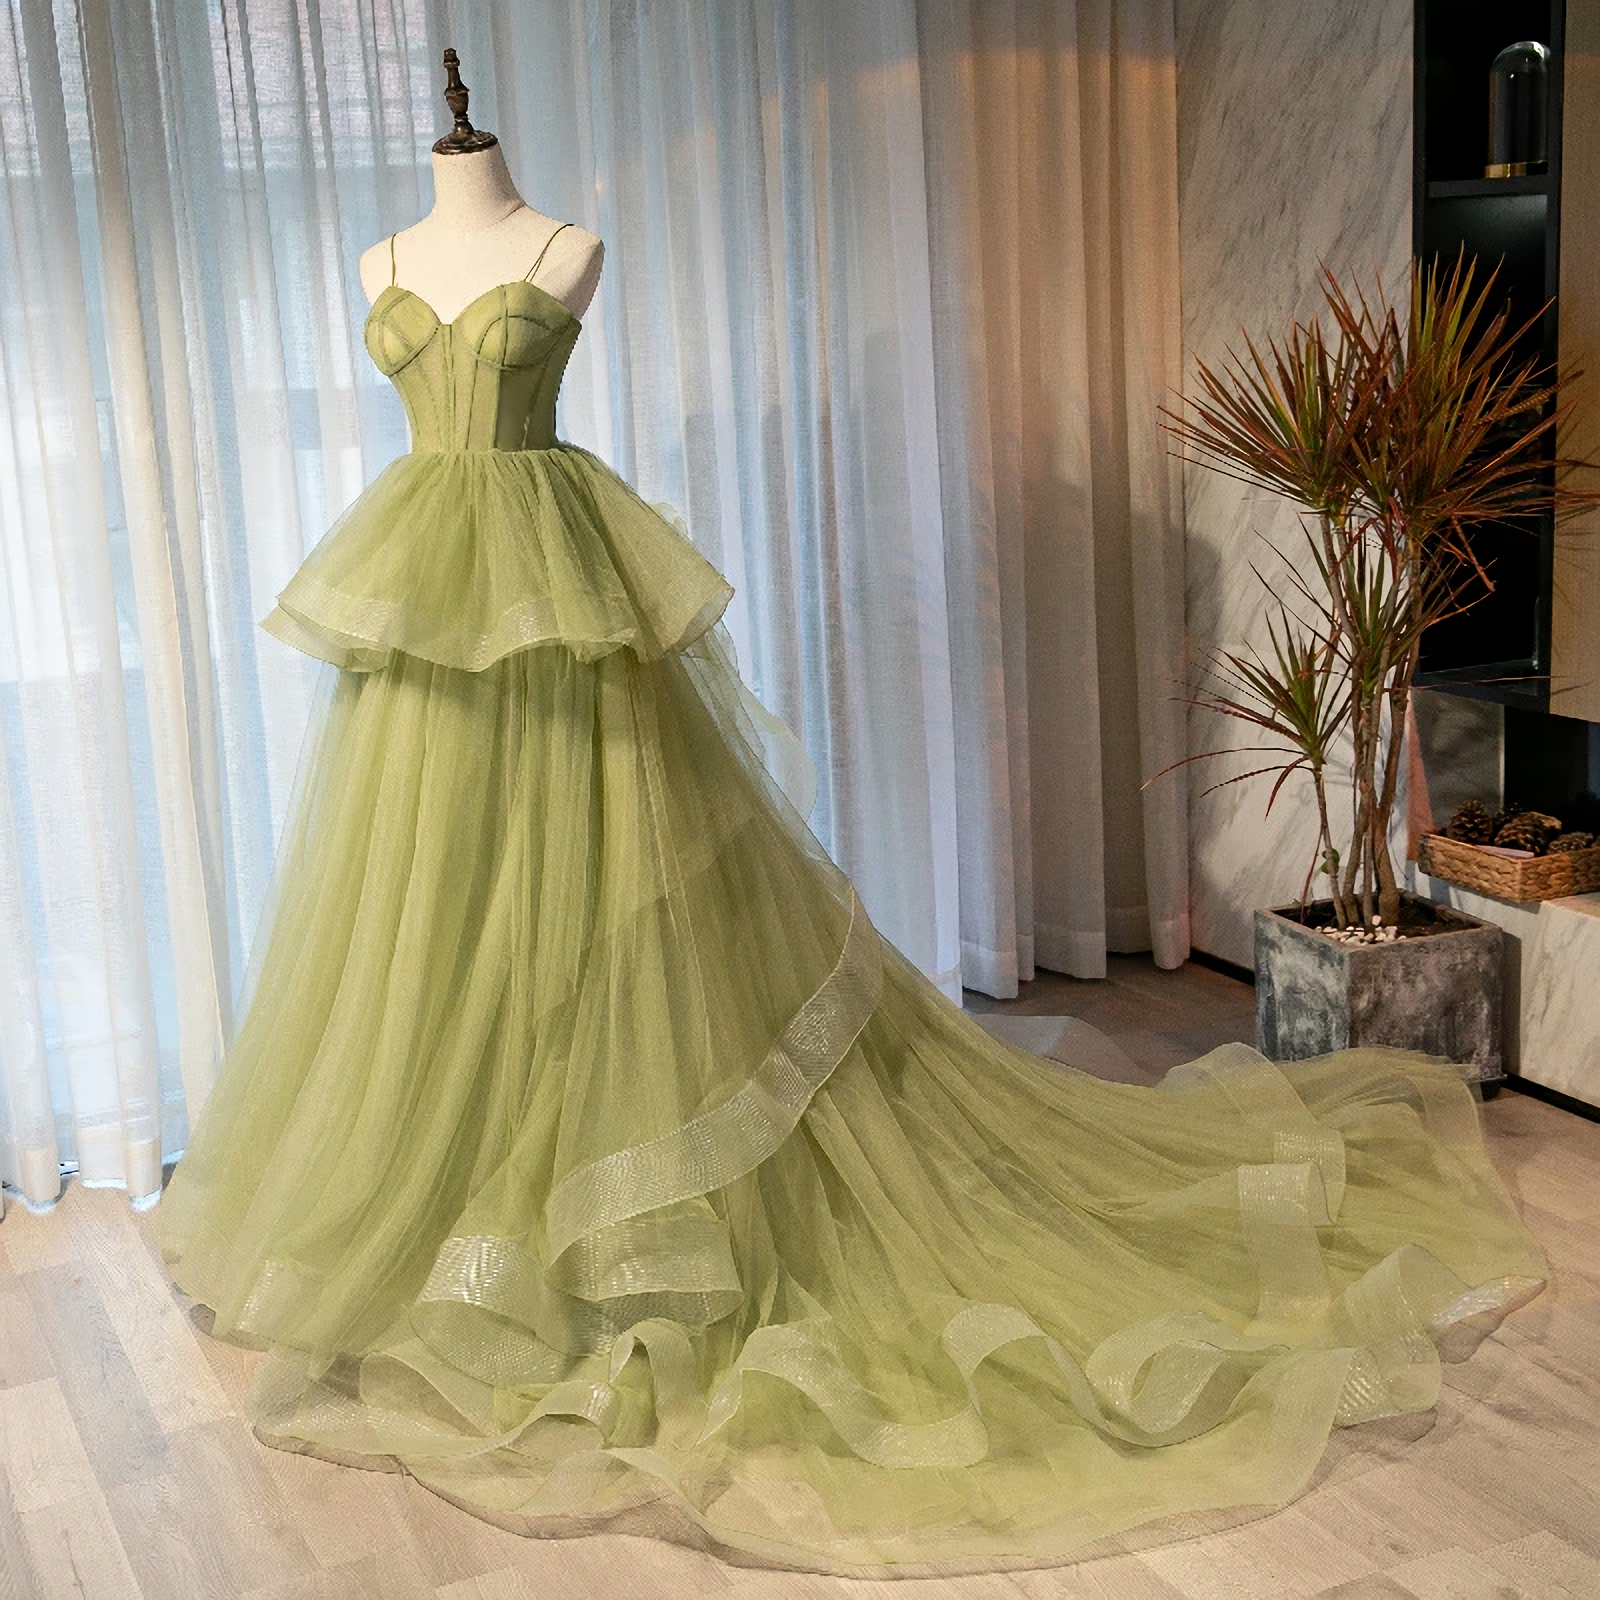 Party Dresses Prom, Beautiful Light Green Sweetheart Layers Princess Formal Gown Green Tulle Long Party Dress, Prom Dress